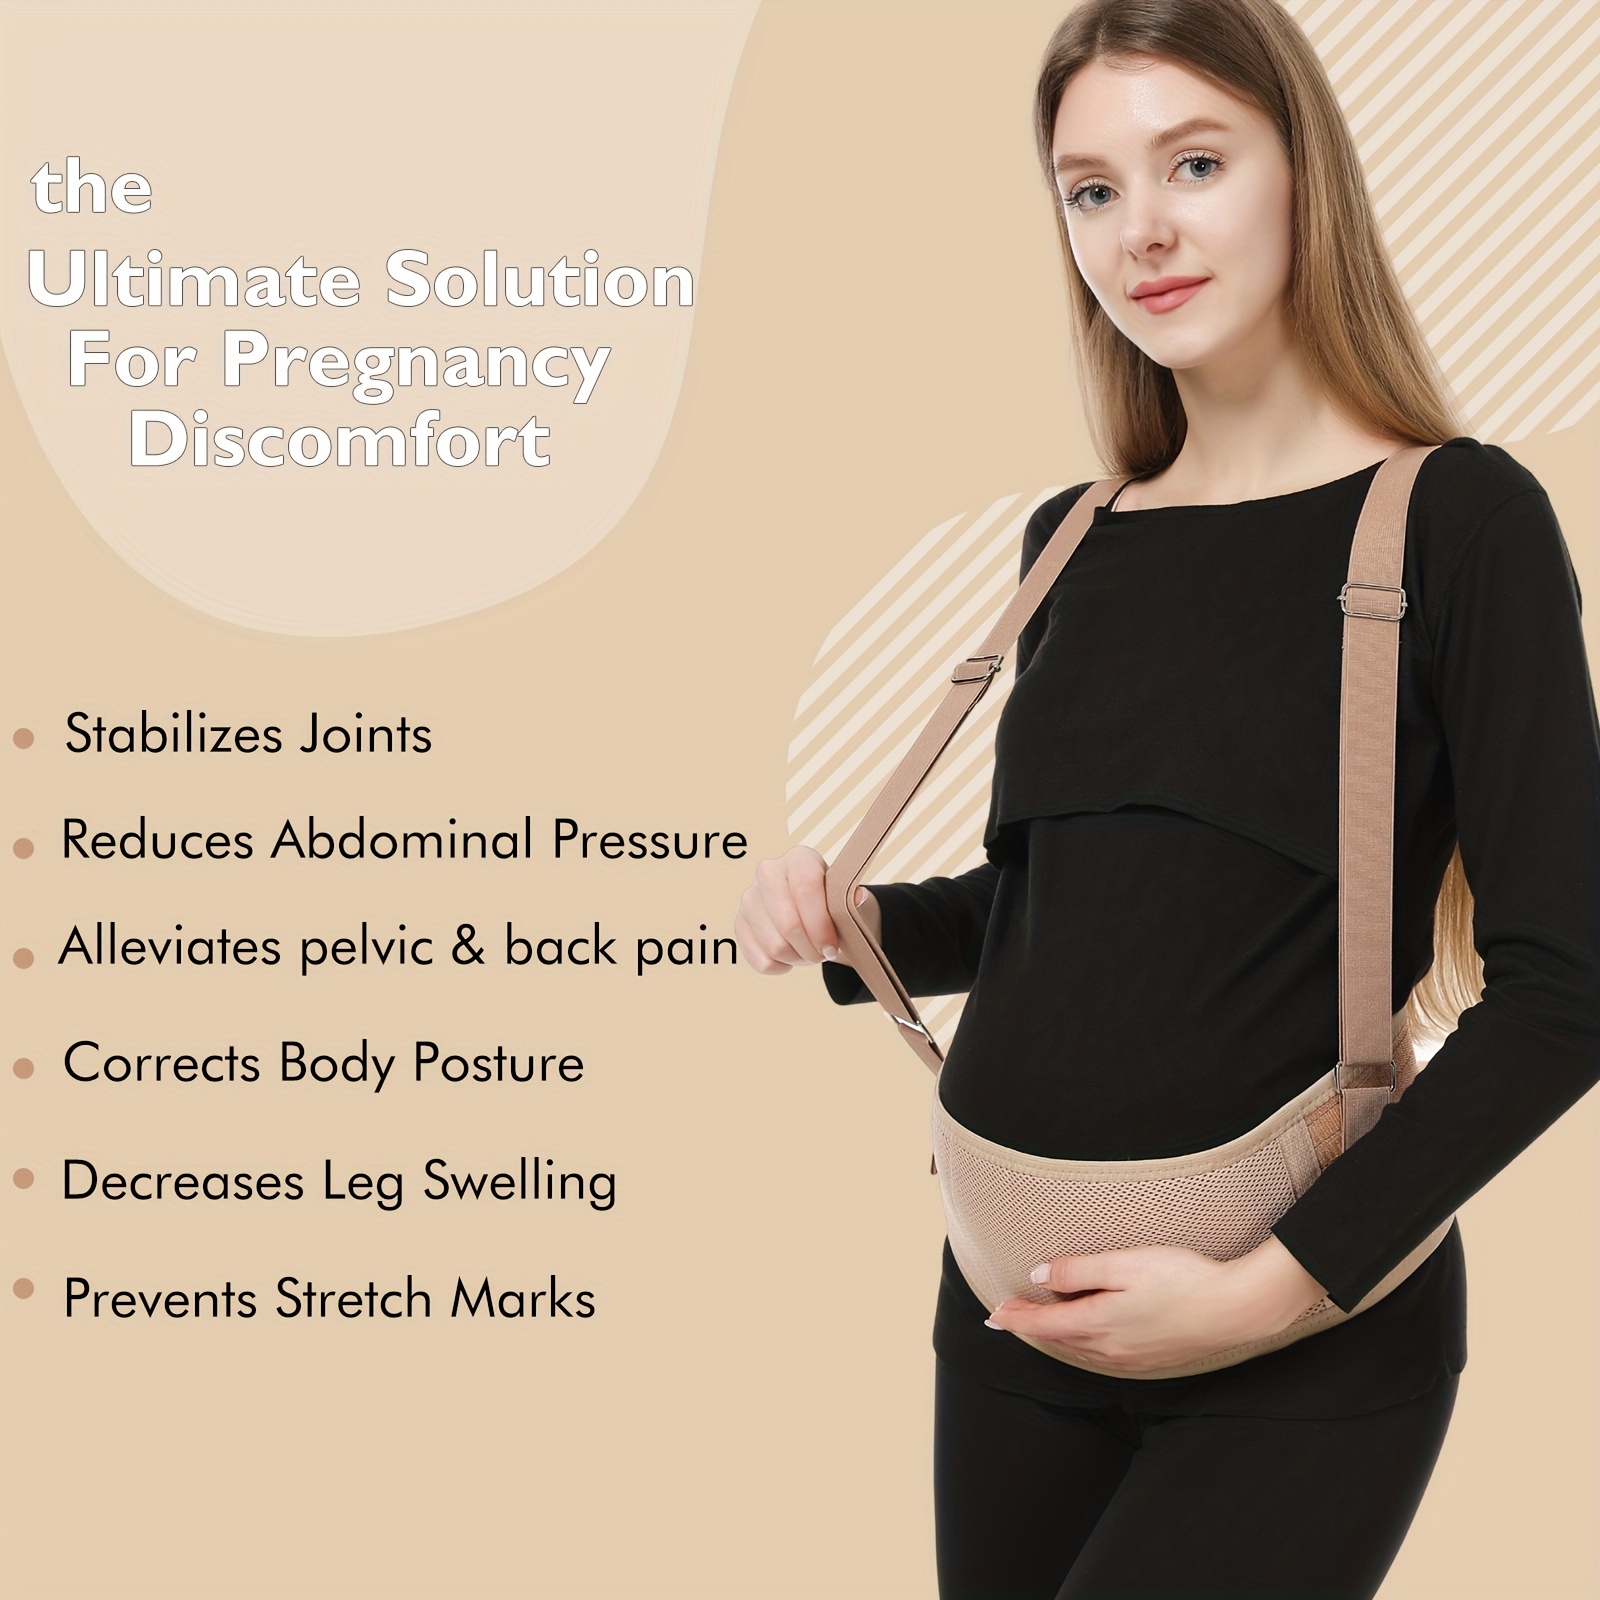 Pelvic Belt Reduces Back Pain & Pregnancy Related Pain